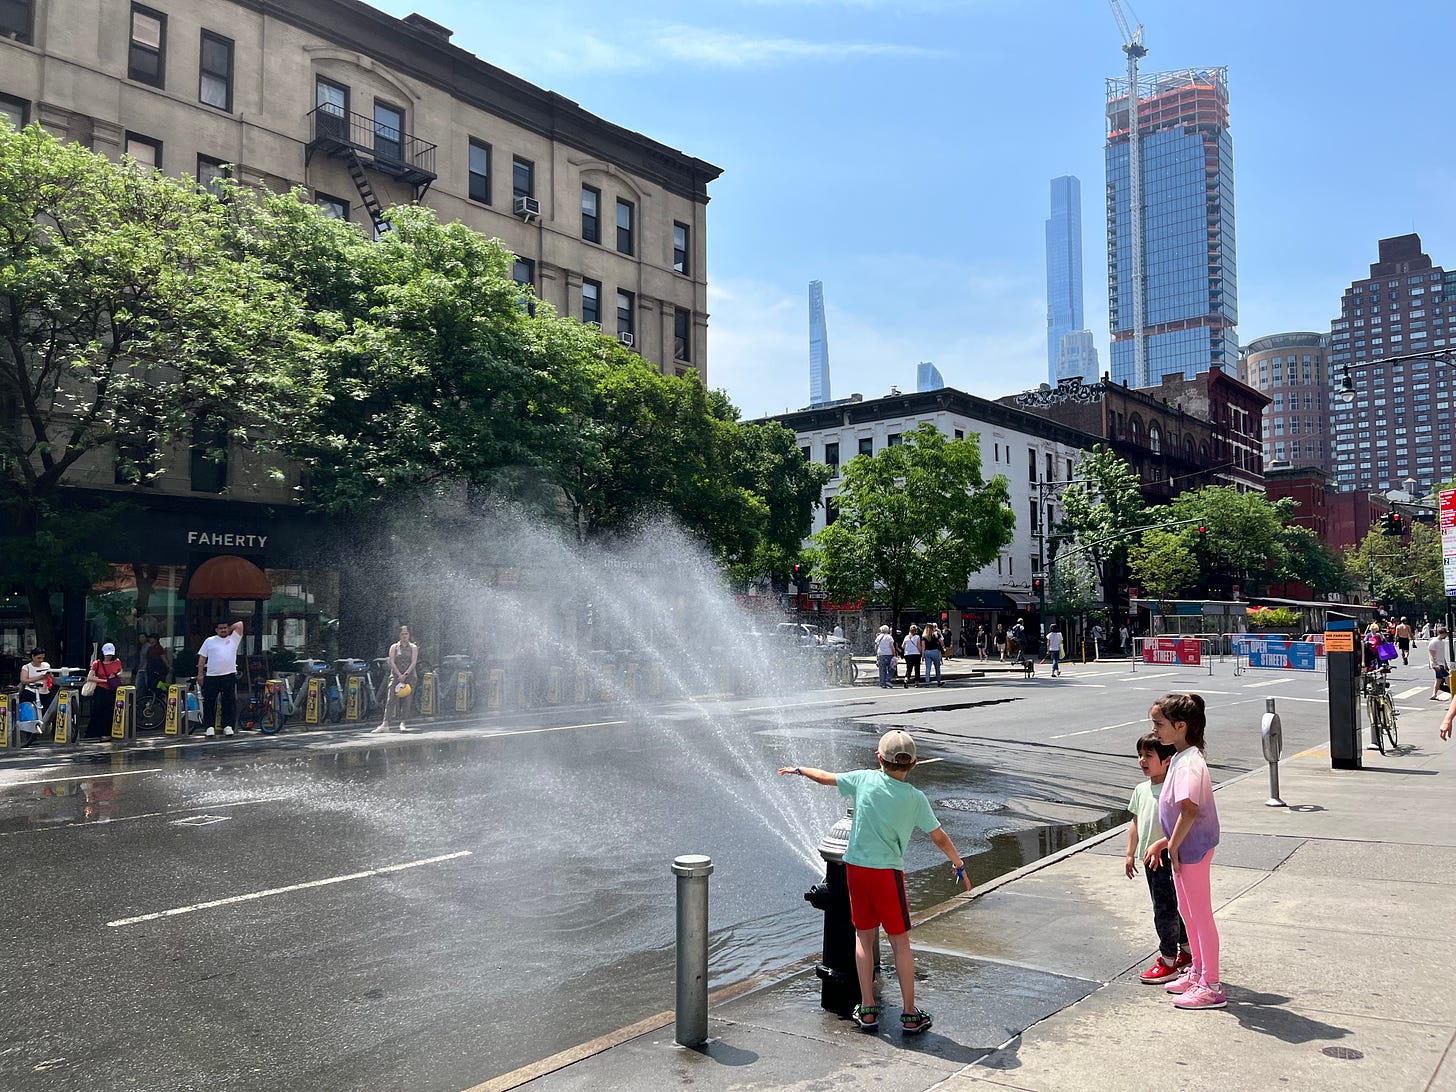 Children playing in the water sprayed by a fire hydrant in new york city with skyscrapers in background and blue sky